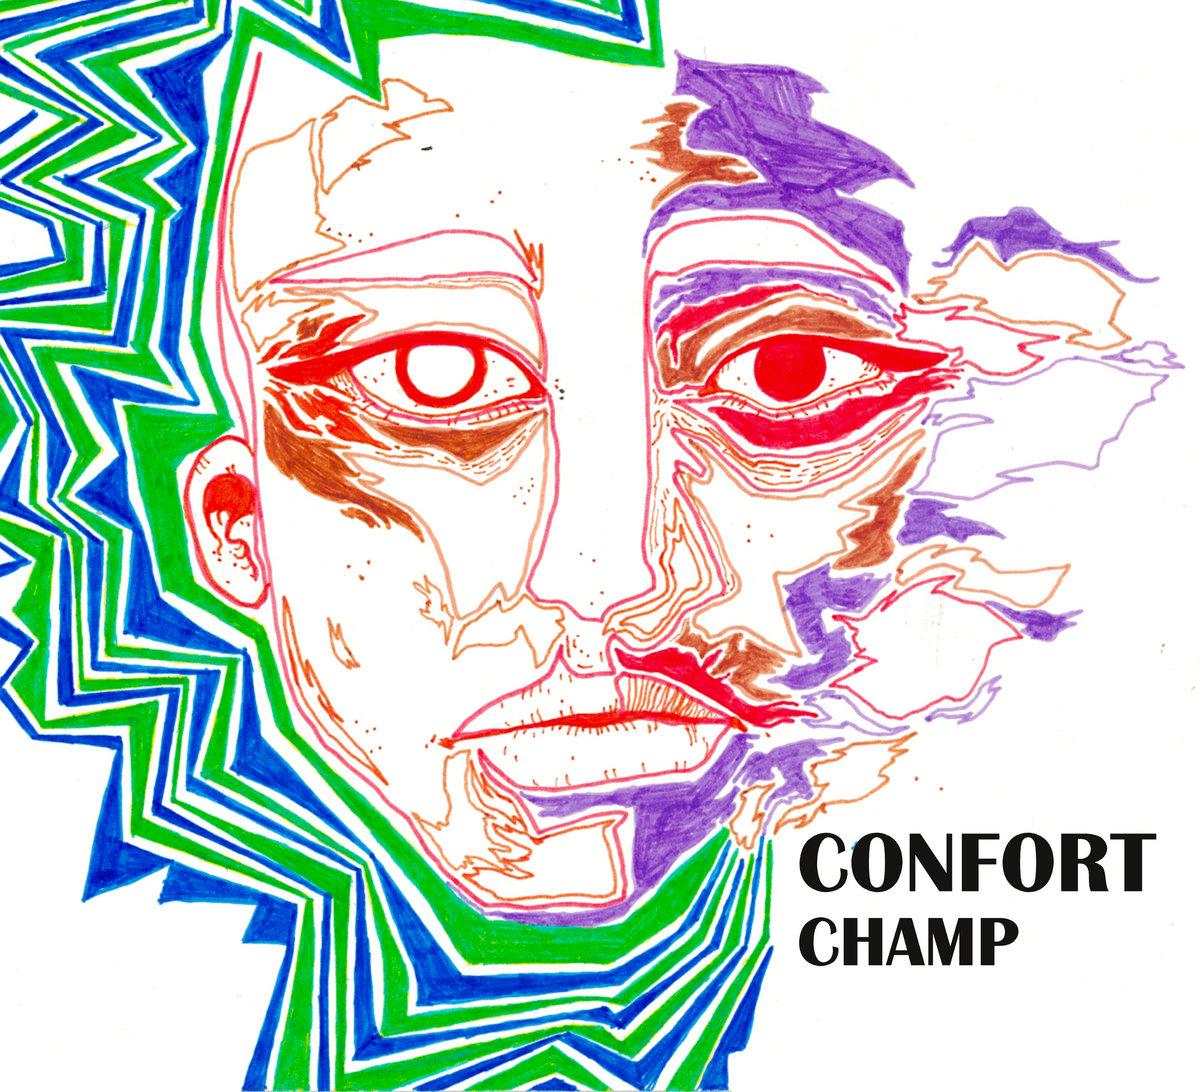 Confort cover champ